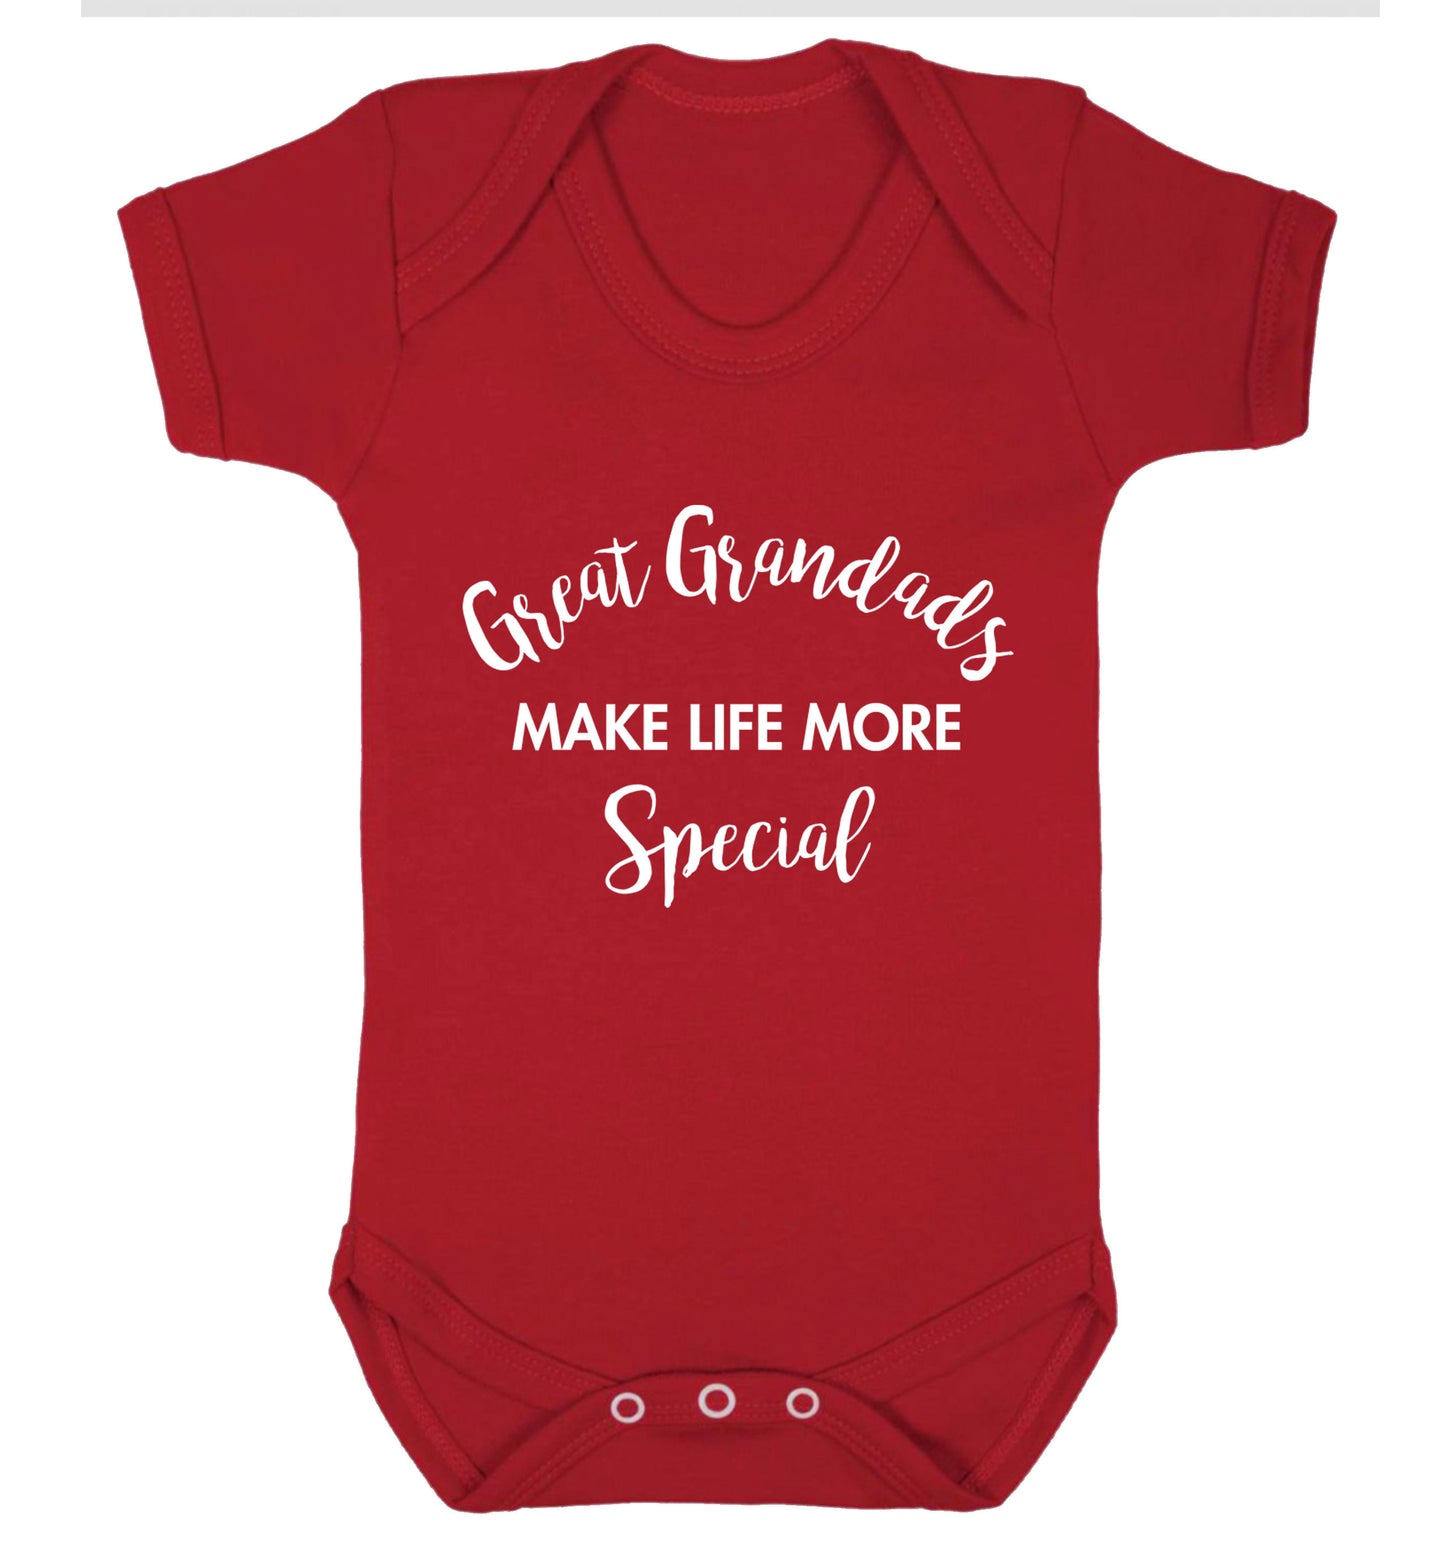 Great Grandads make life more special Baby Vest red 18-24 months